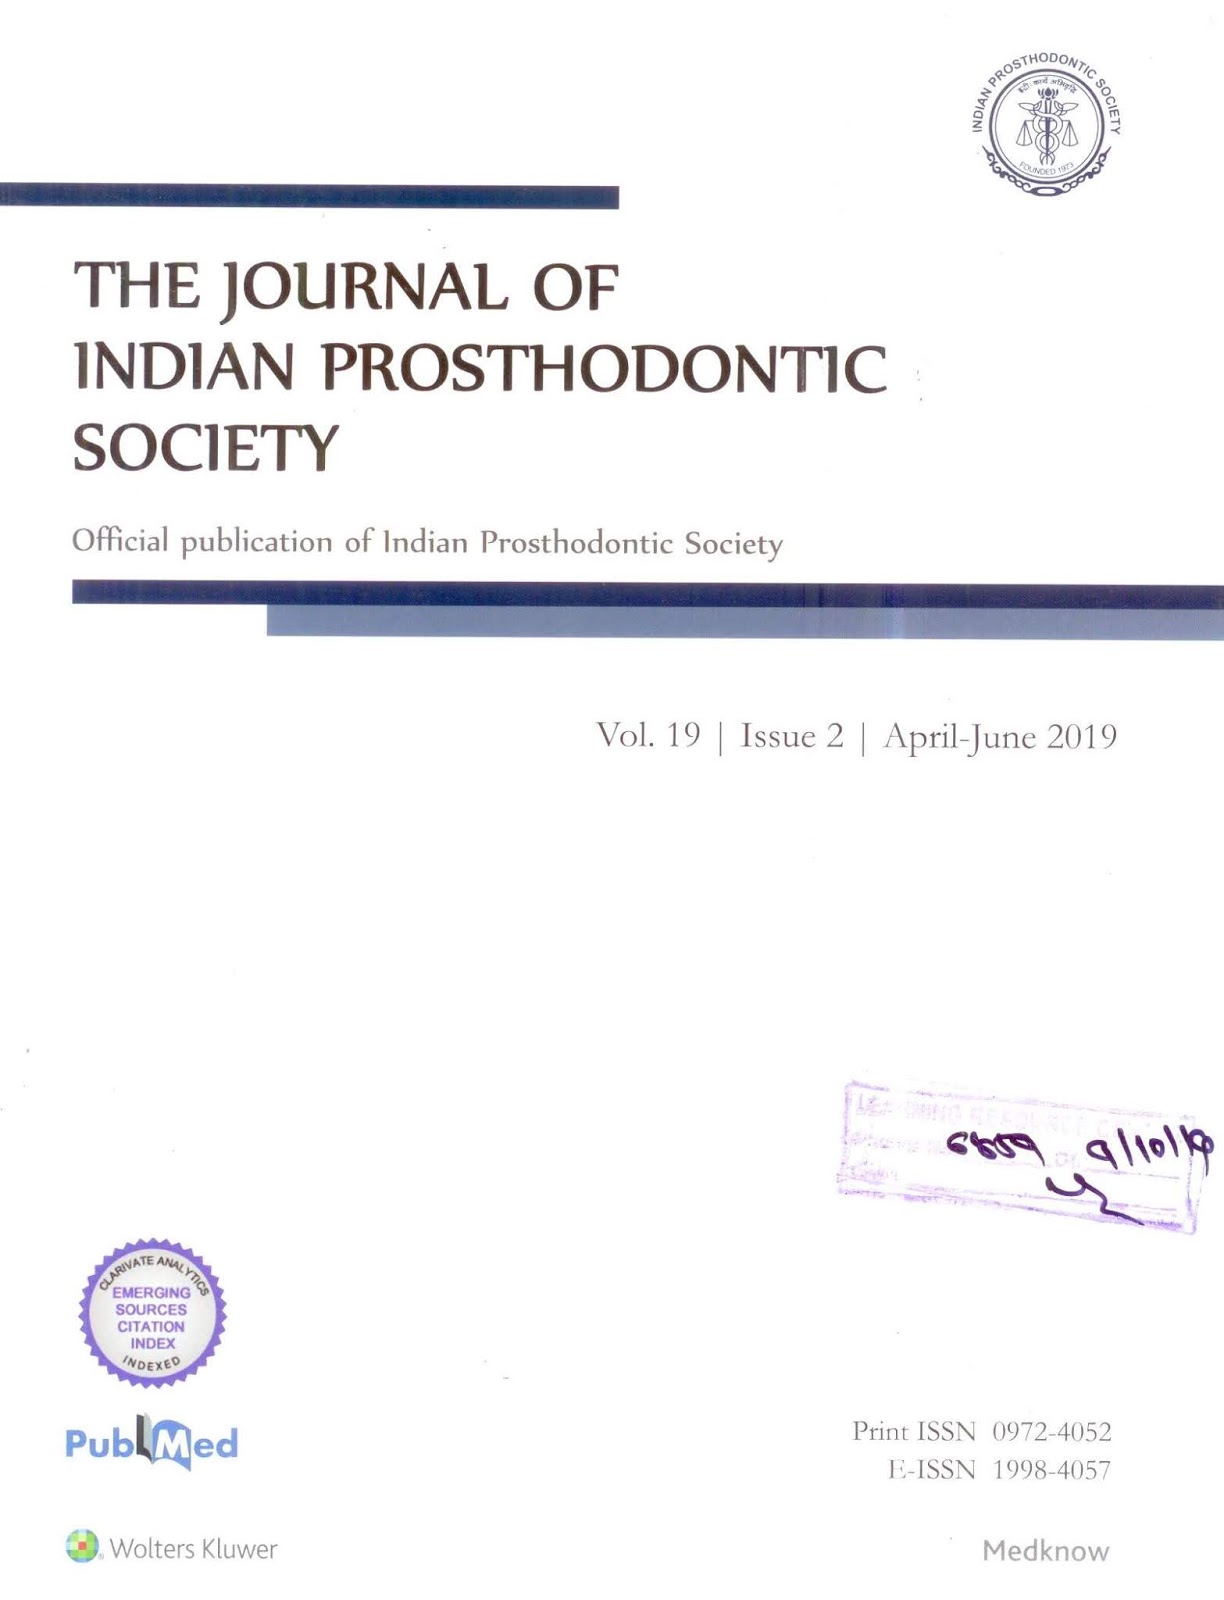 http://www.j-ips.org/showBackIssue.asp?issn=0972-4052;year=2019;volume=19;issue=2;month=April-June